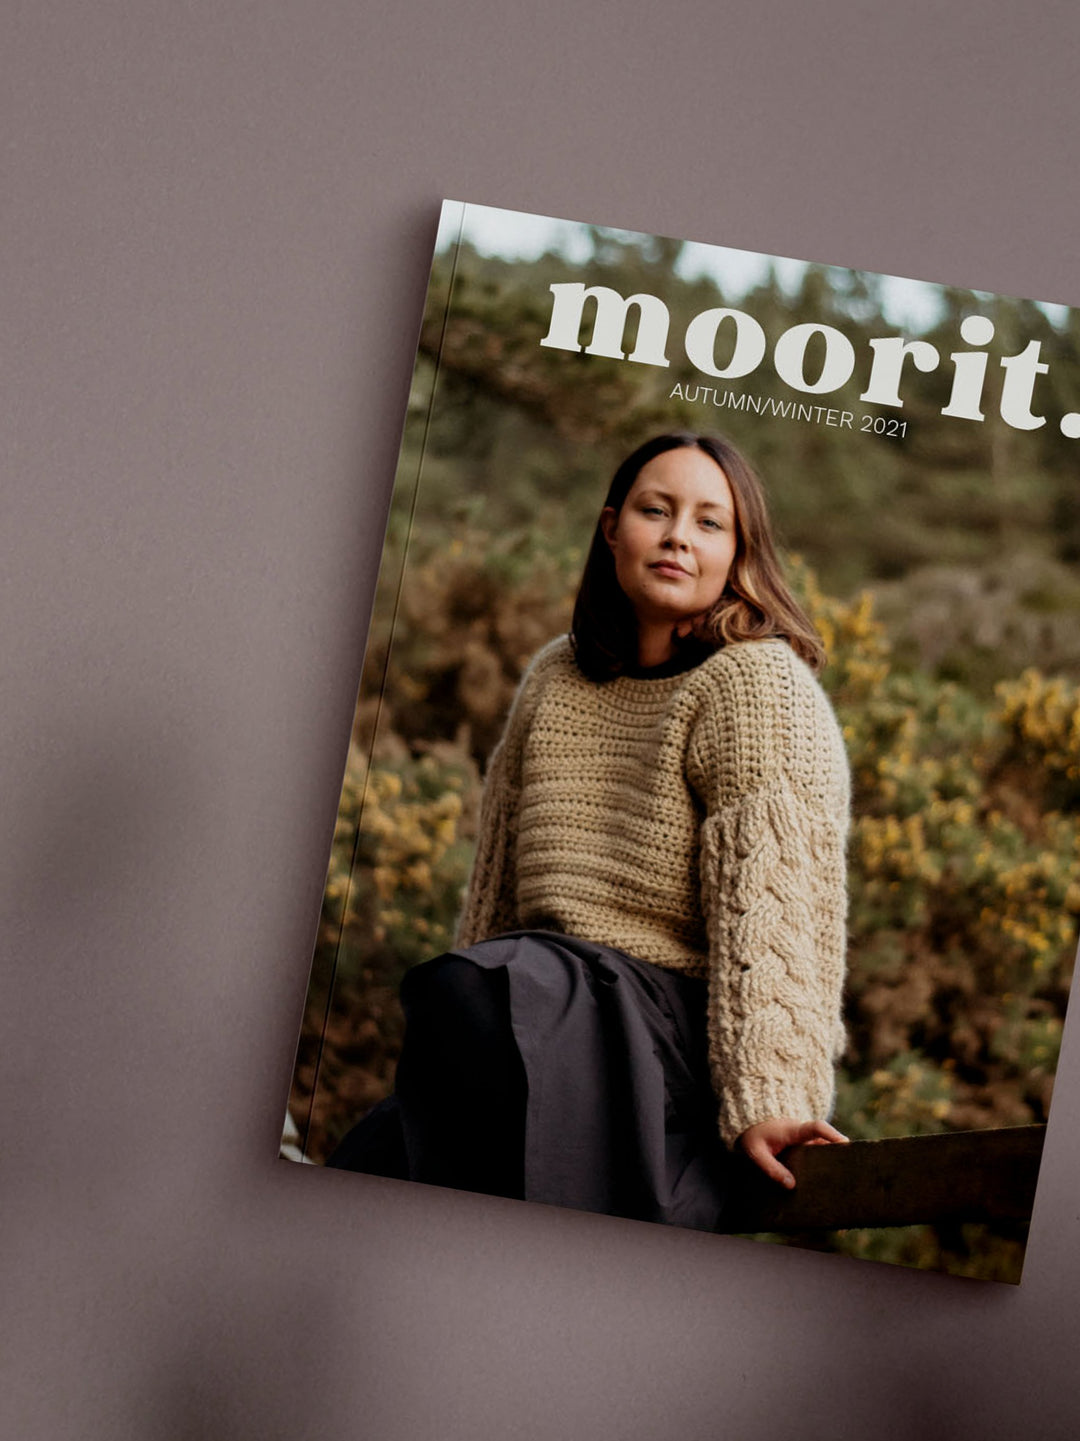 The cover of Moorit Autumn/winter 2021.